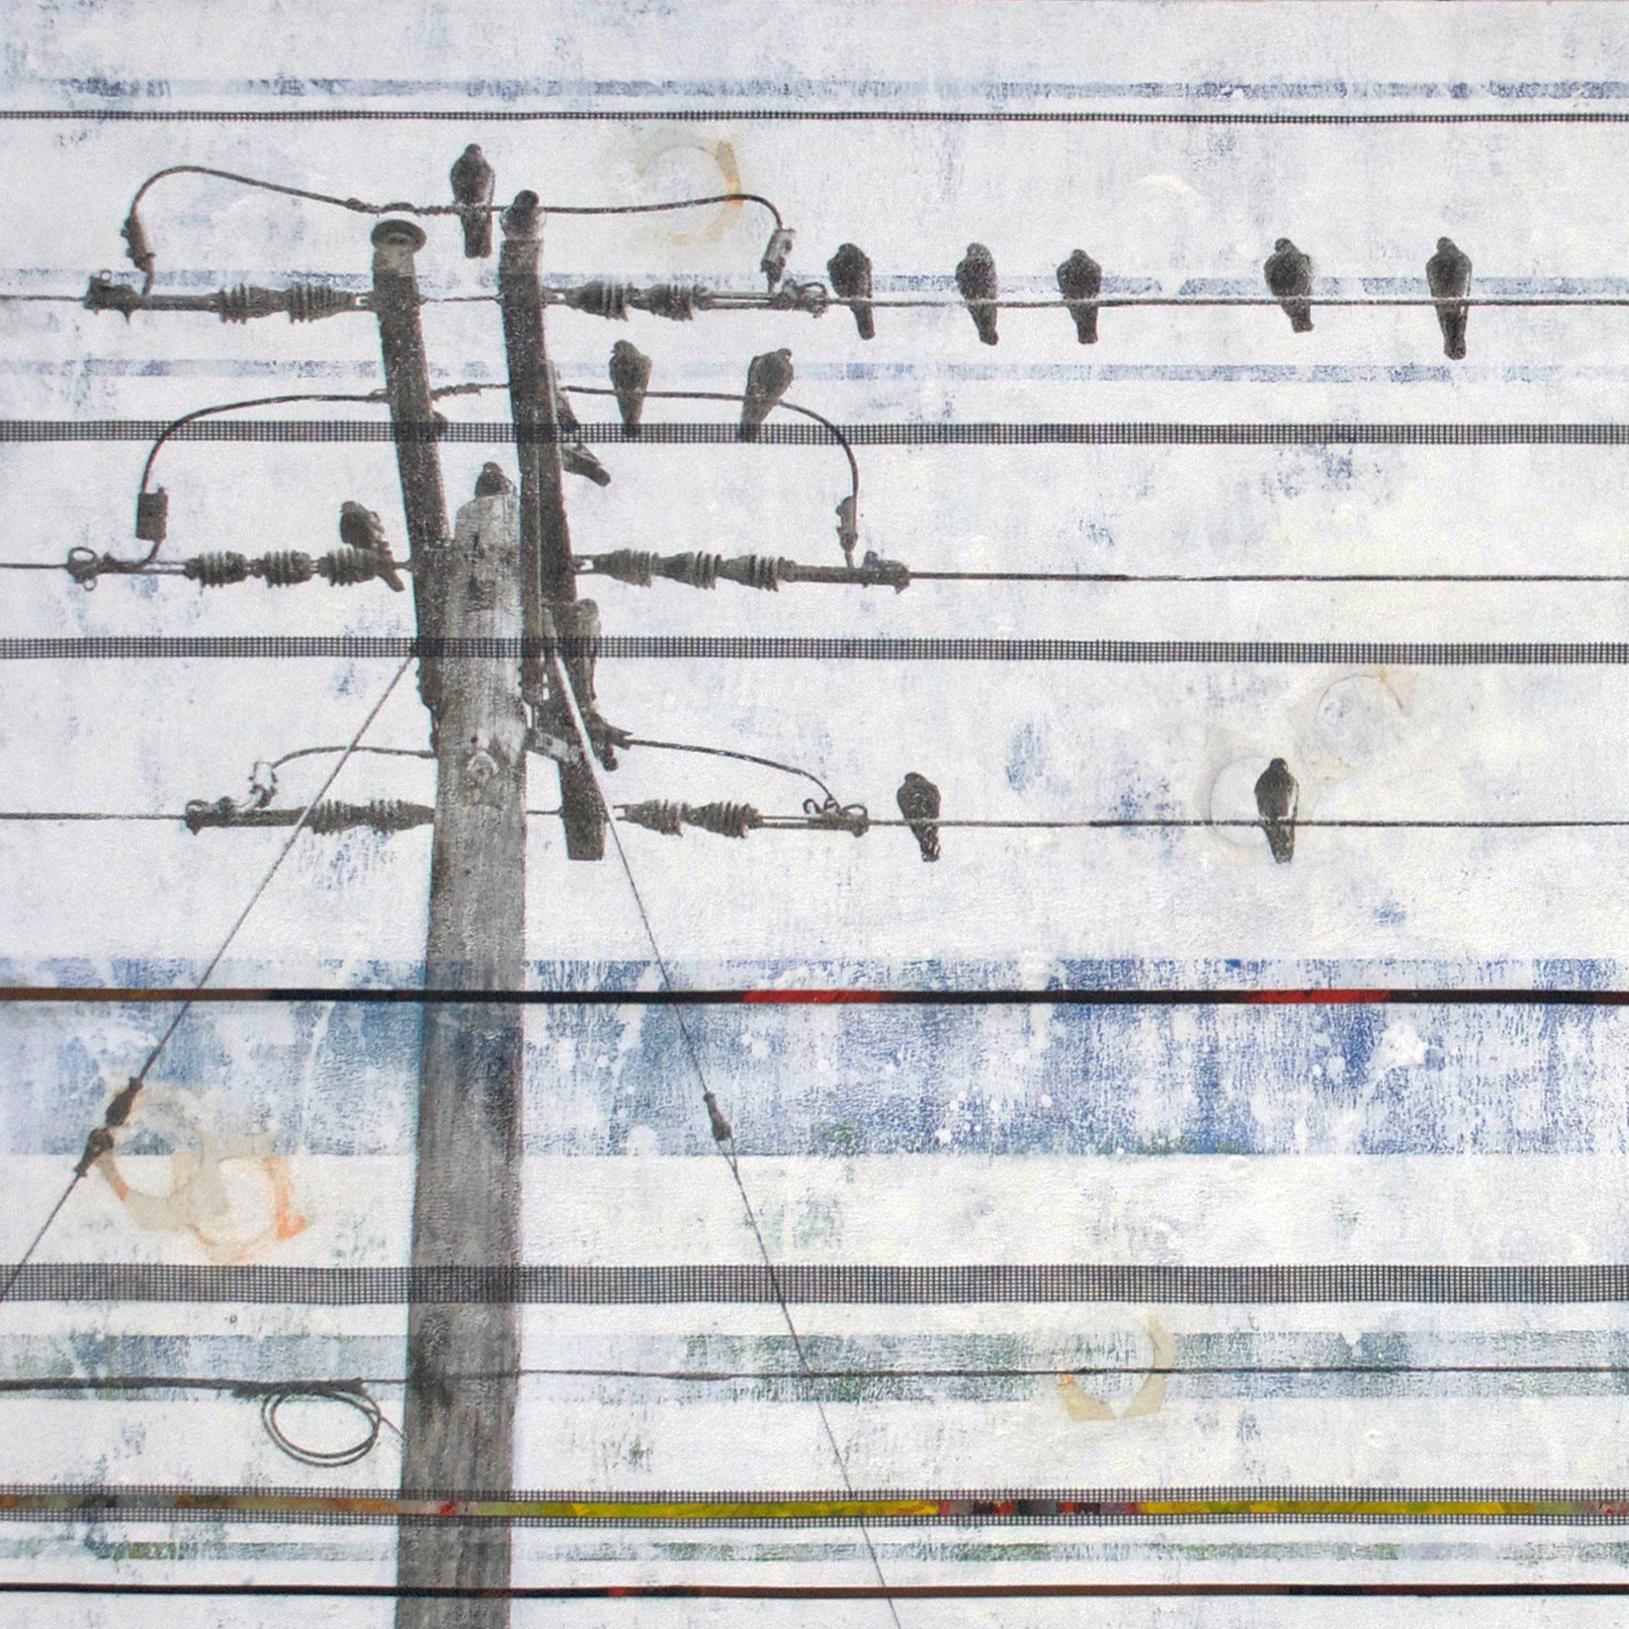 On A Clear Day is a contemporary abstract mixed-media piece by Holly Harrison. This piece features a telephone pole with a row of birds perched on its wires. A background of blue horizontal stripes in alternating sizes as well as collage components